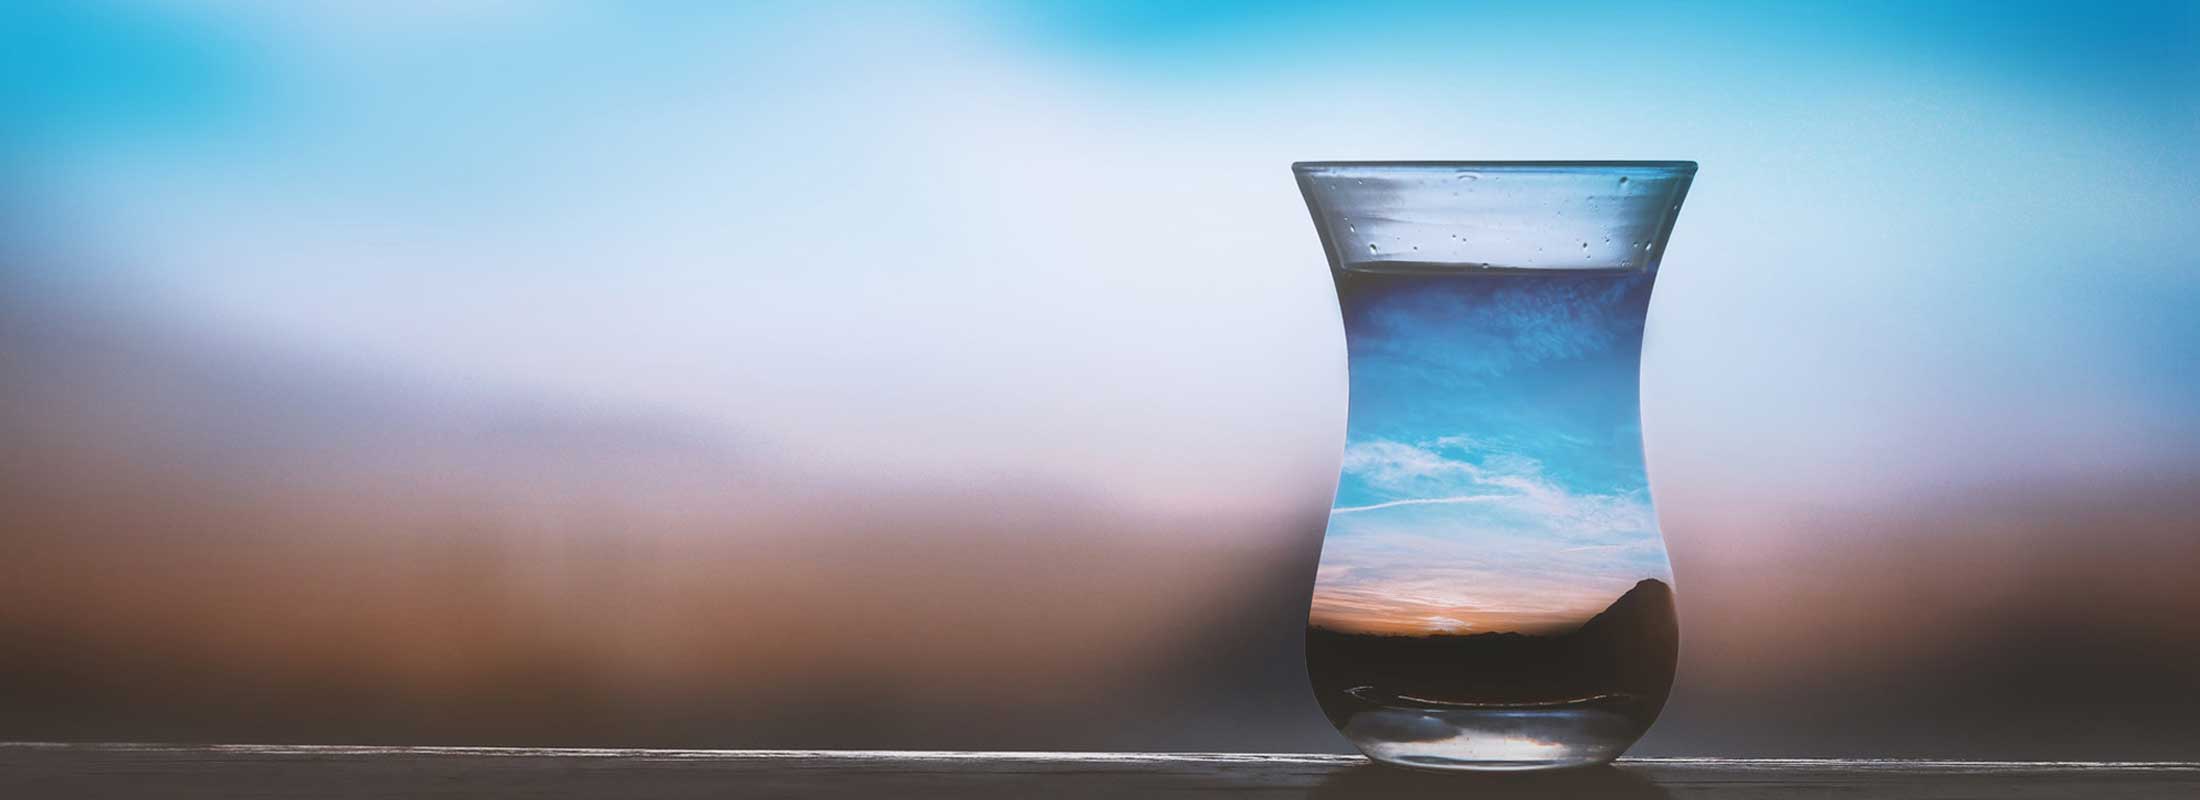 Water glass reflecting the landscape background